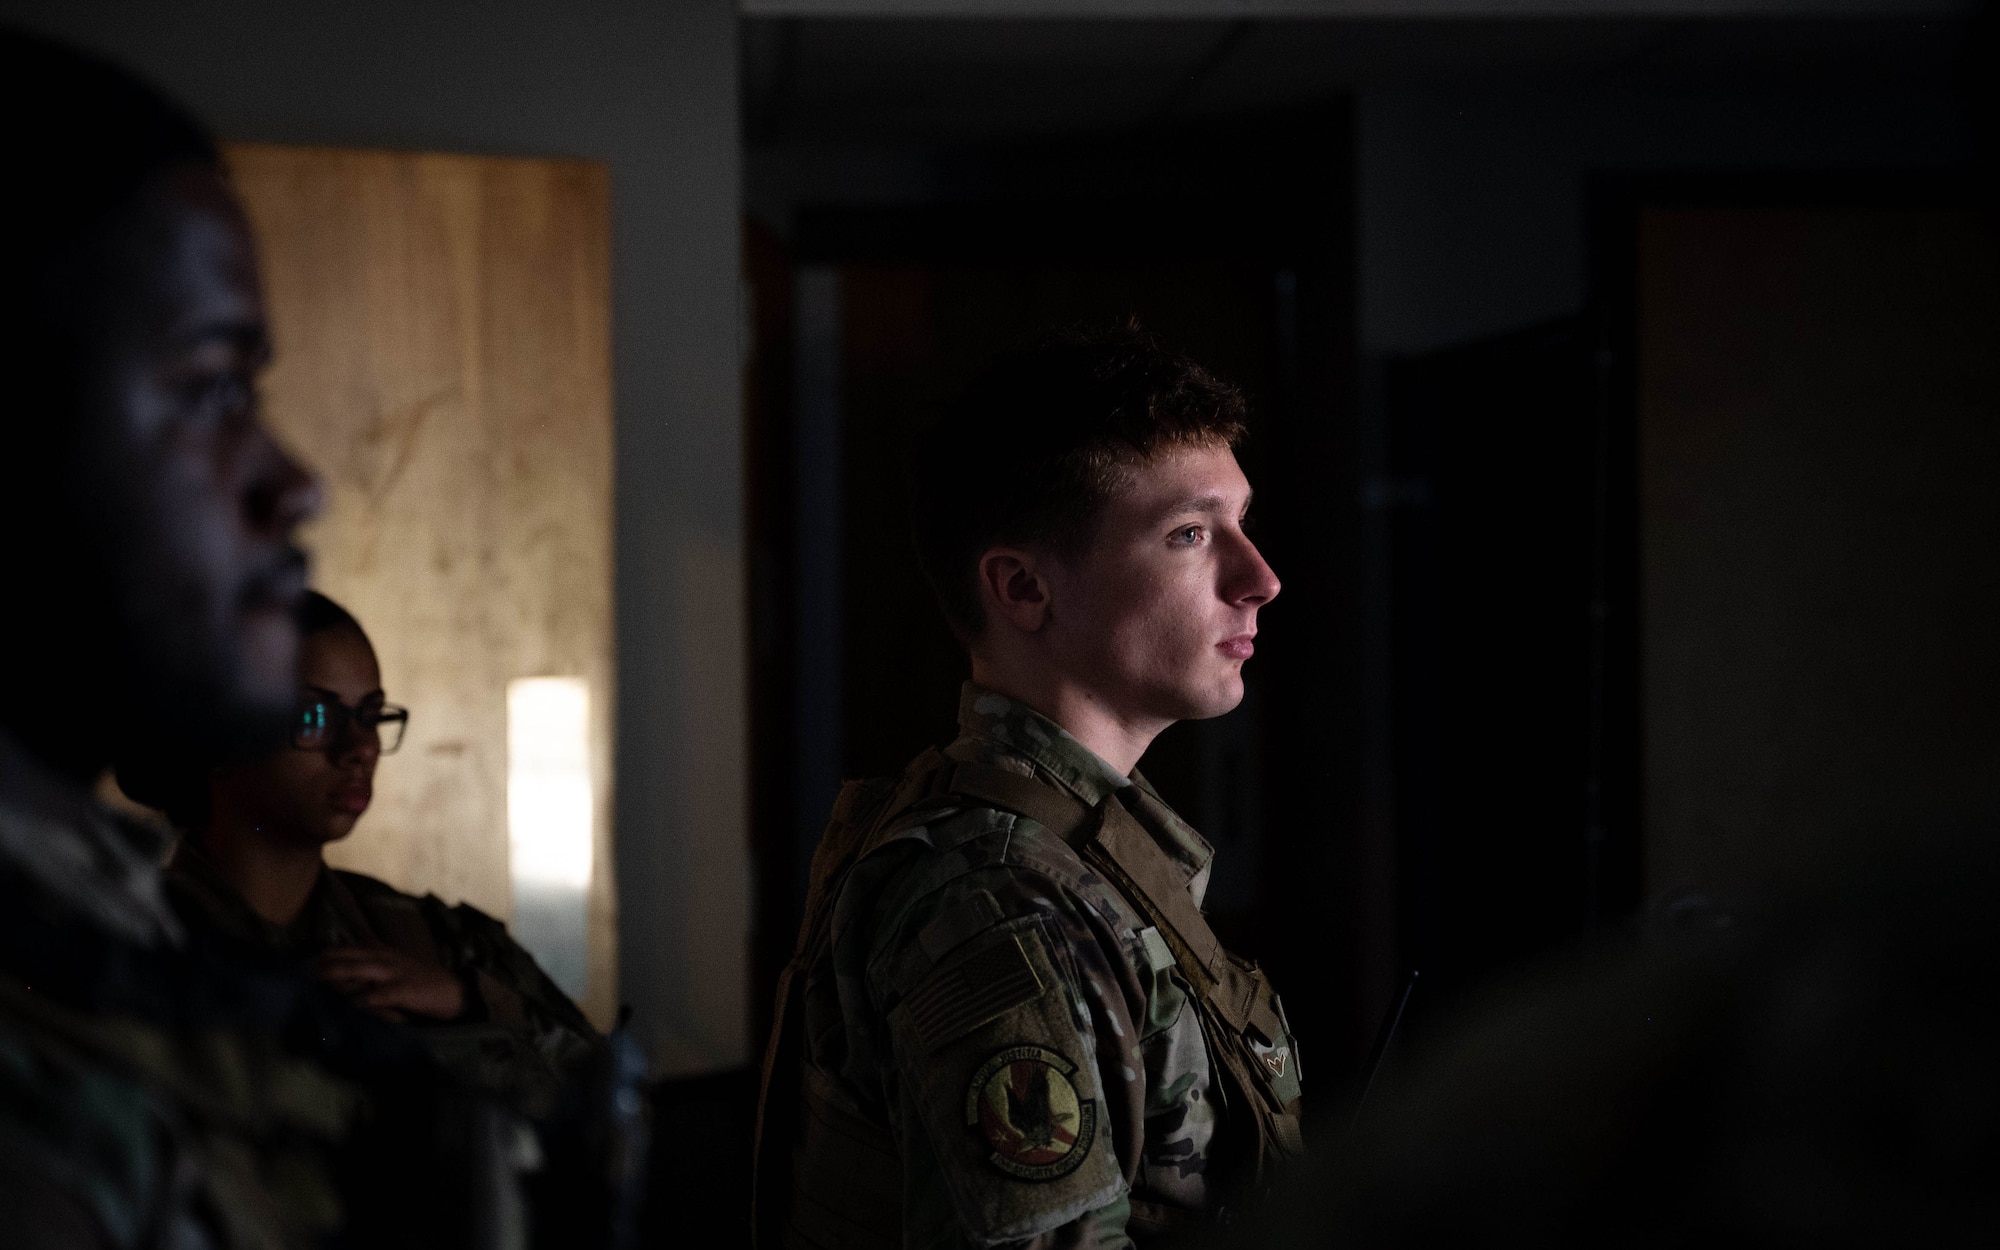 Airman receives instructions in a dark, closed room